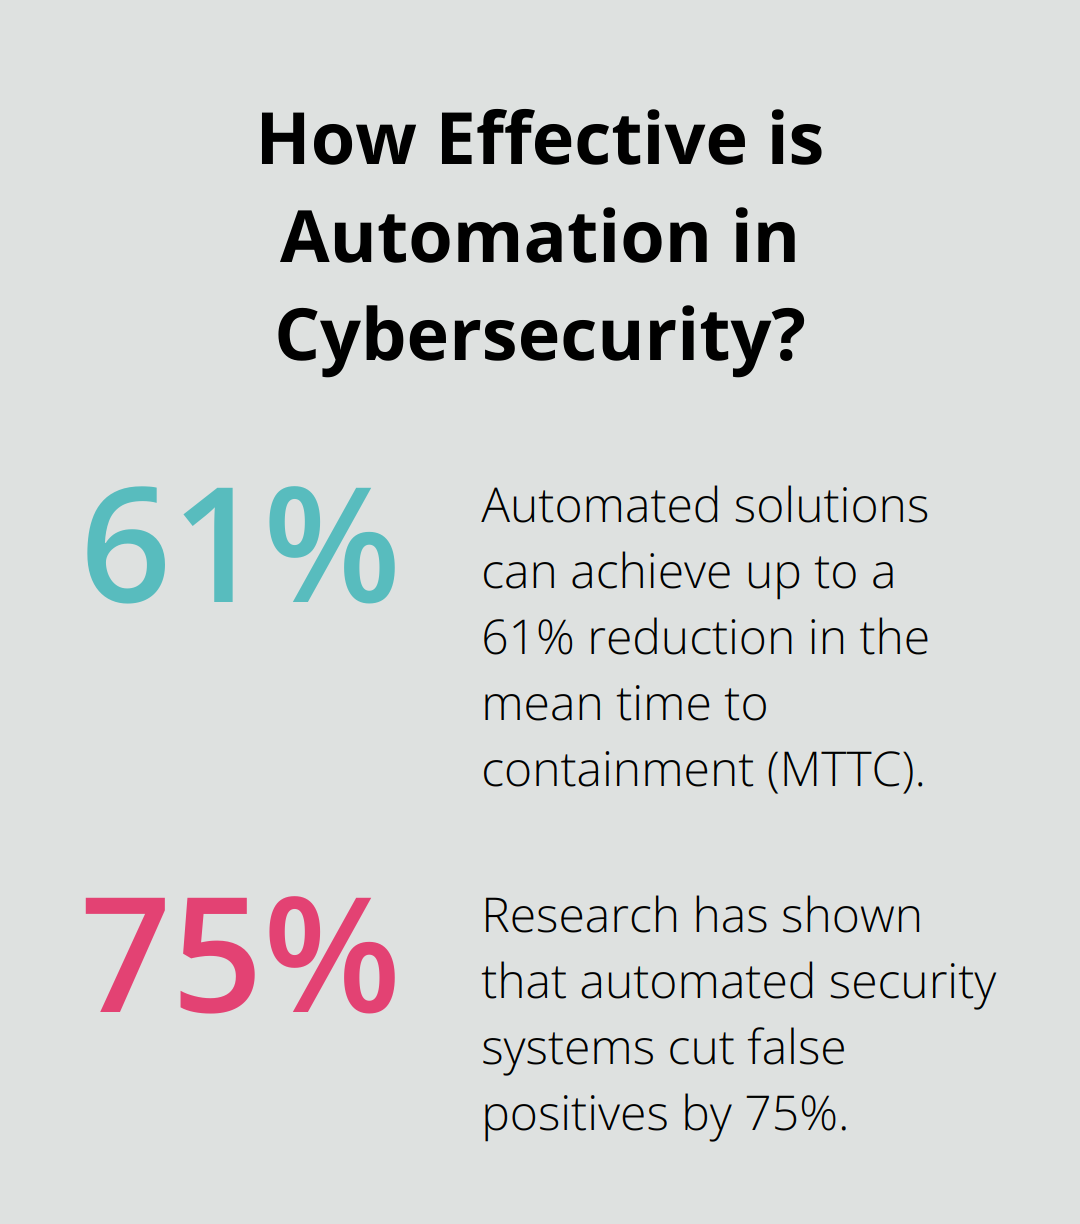 Fact - How Effective is Automation in Cybersecurity?